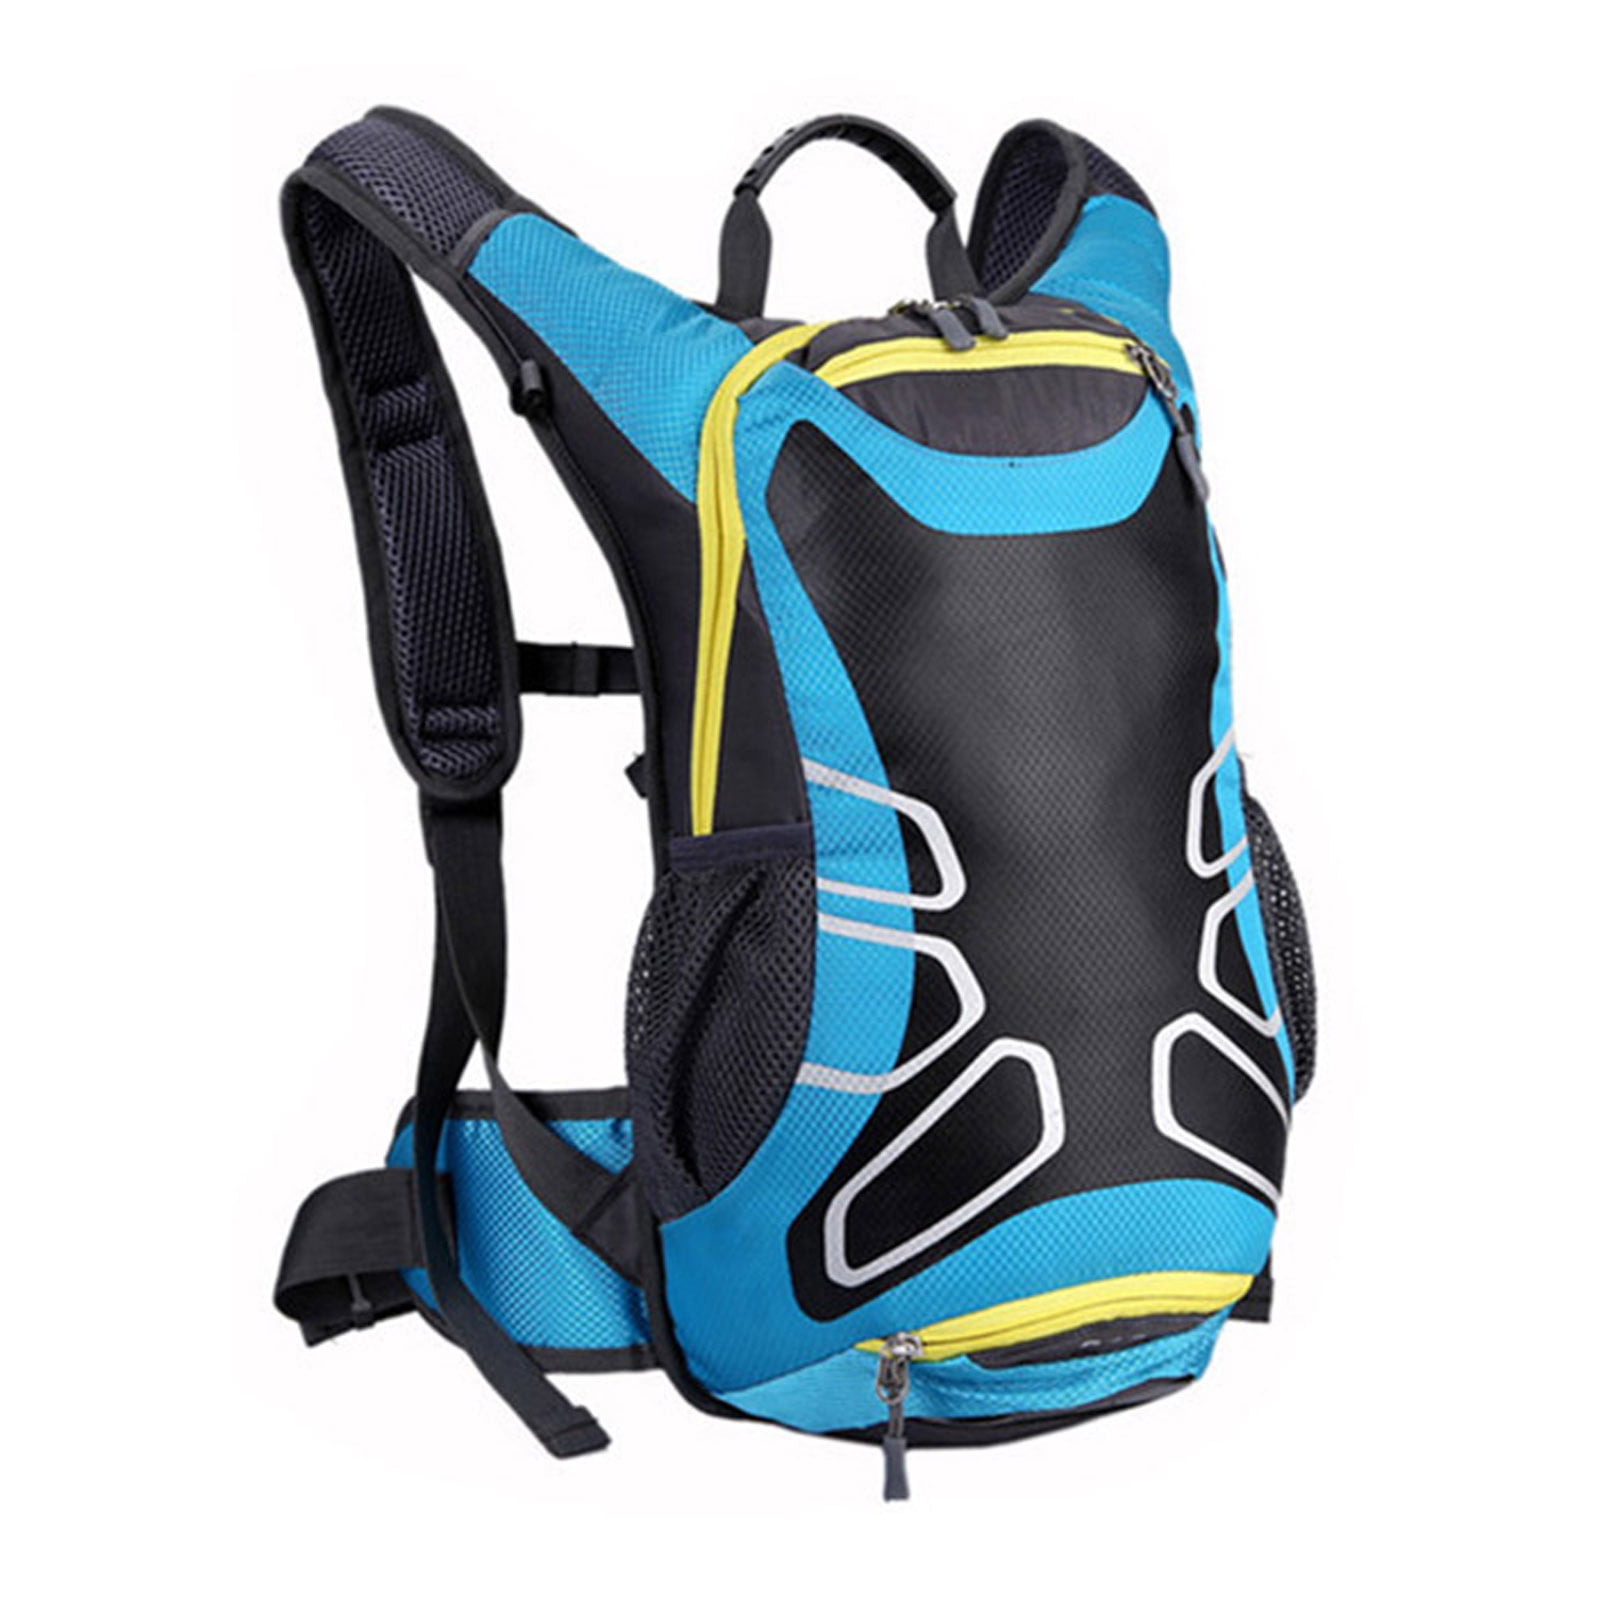 Men Hydration Pack Sport Water Bag Backpack Riding Travel Water-resistant Nylon 